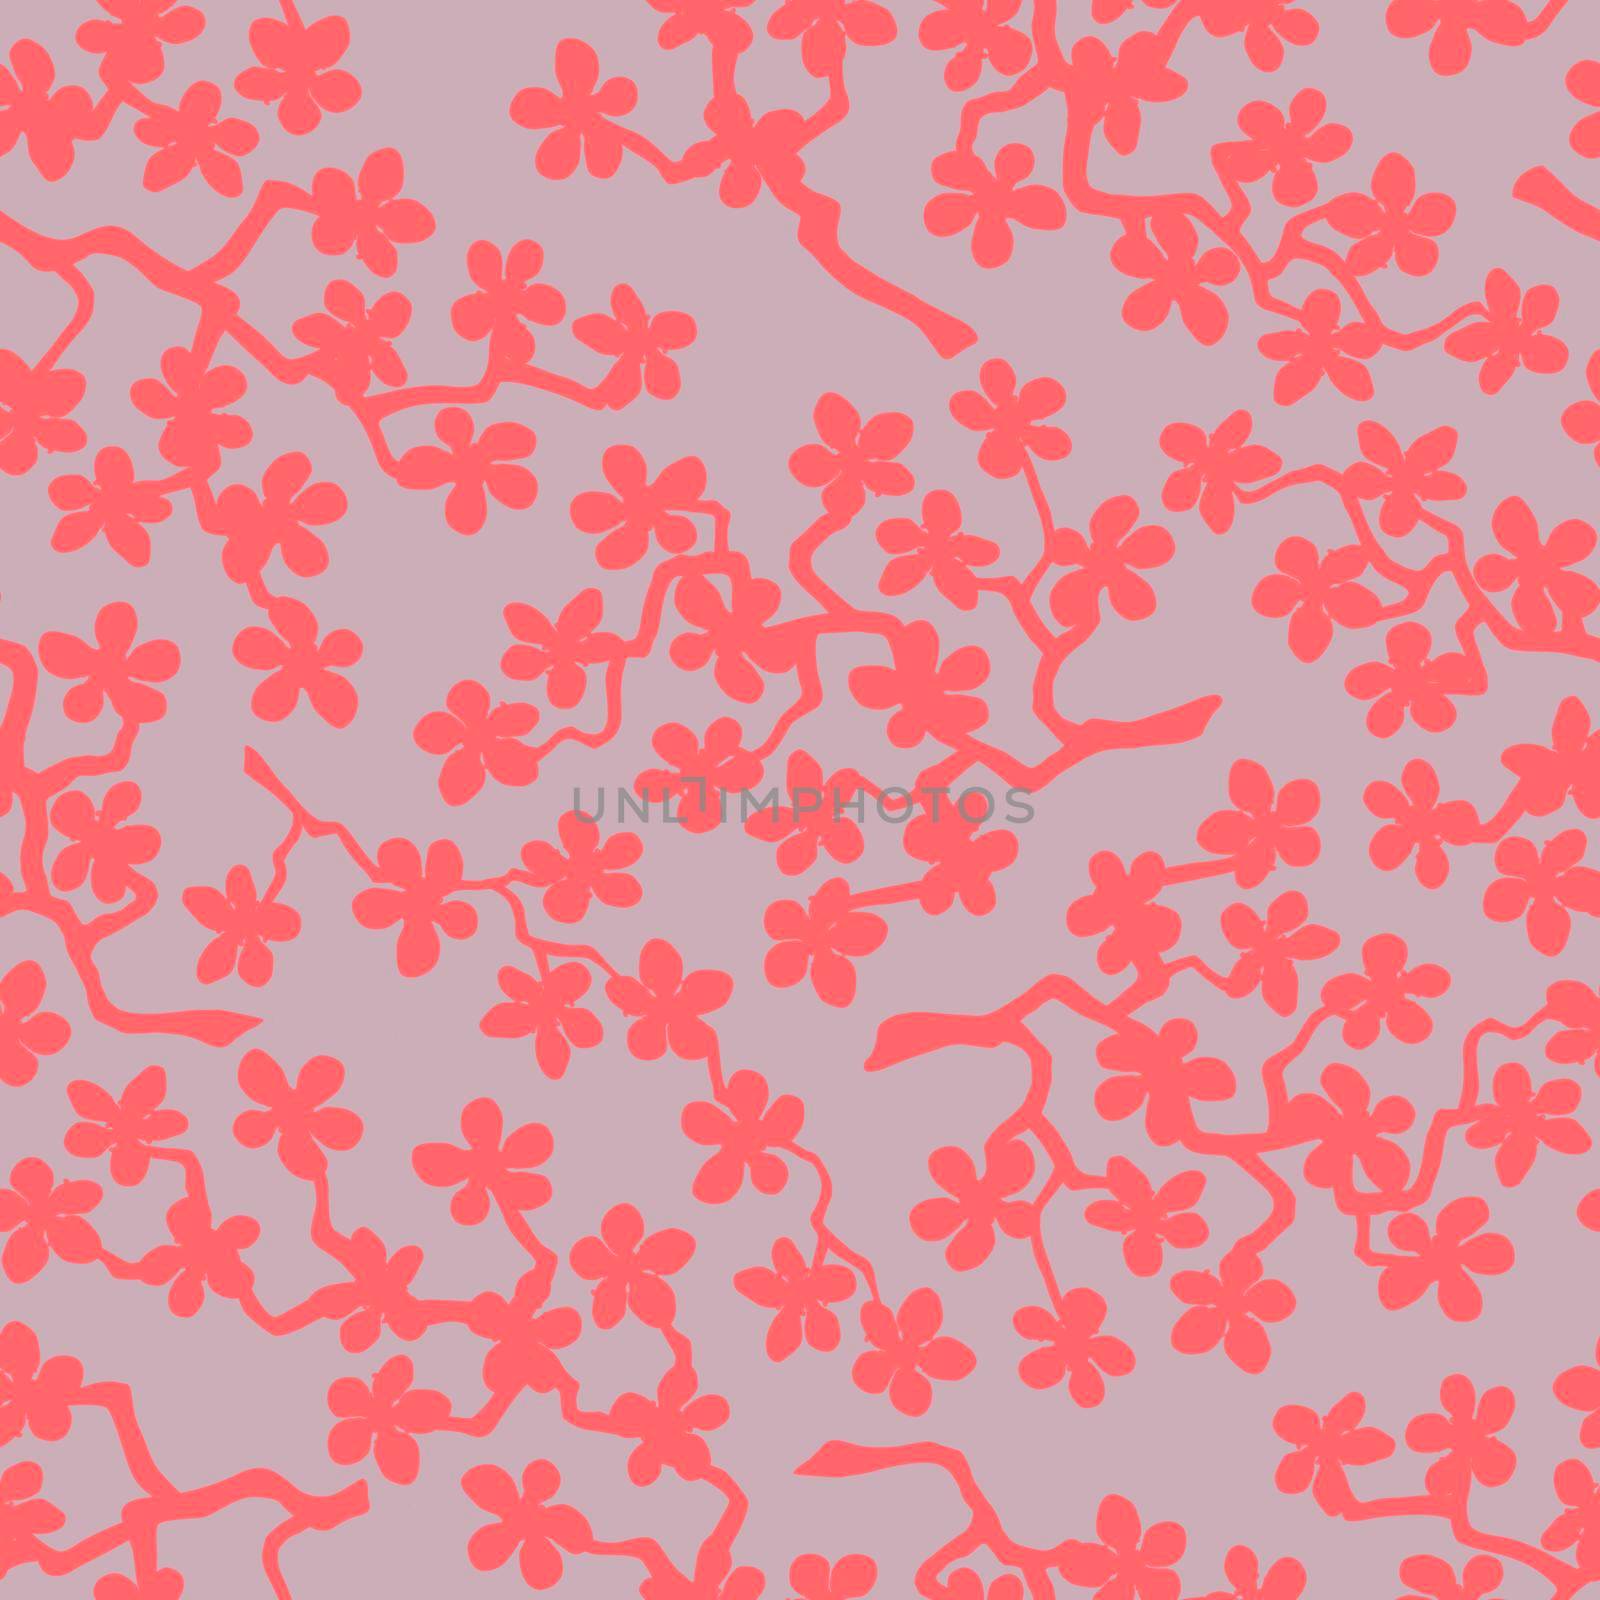 Seamless pattern with blossoming Japanese cherry sakura branches for fabric,packaging,wallpaper,textile decor,design, invitations,cards,print,gift wrap,manufacturing.Coral flowers on pink background